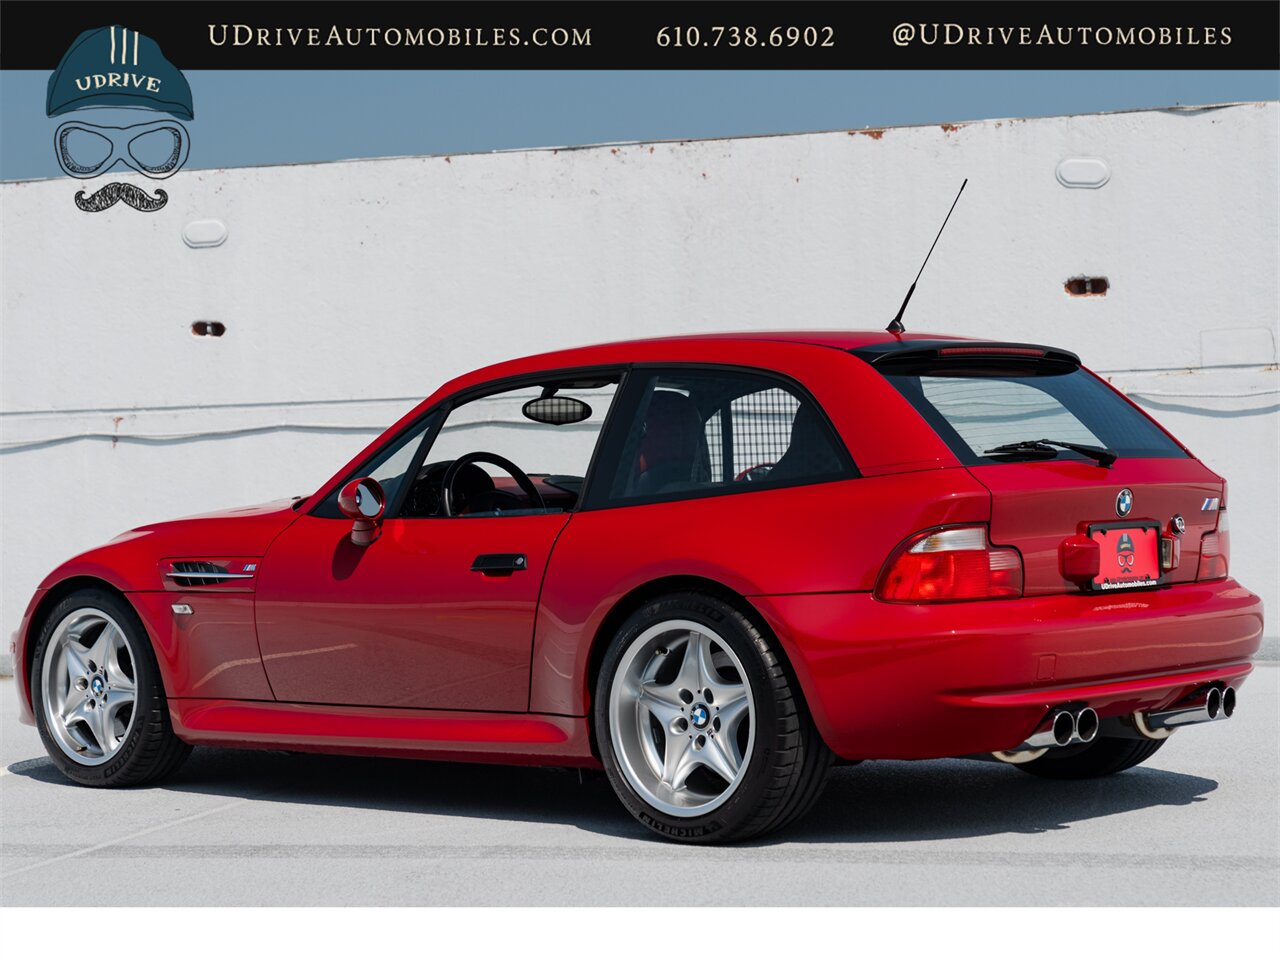 2000 BMW Z3 M  Coupe 25k Miles  Sunroof Delete $4k Recent Service - Photo 25 - West Chester, PA 19382